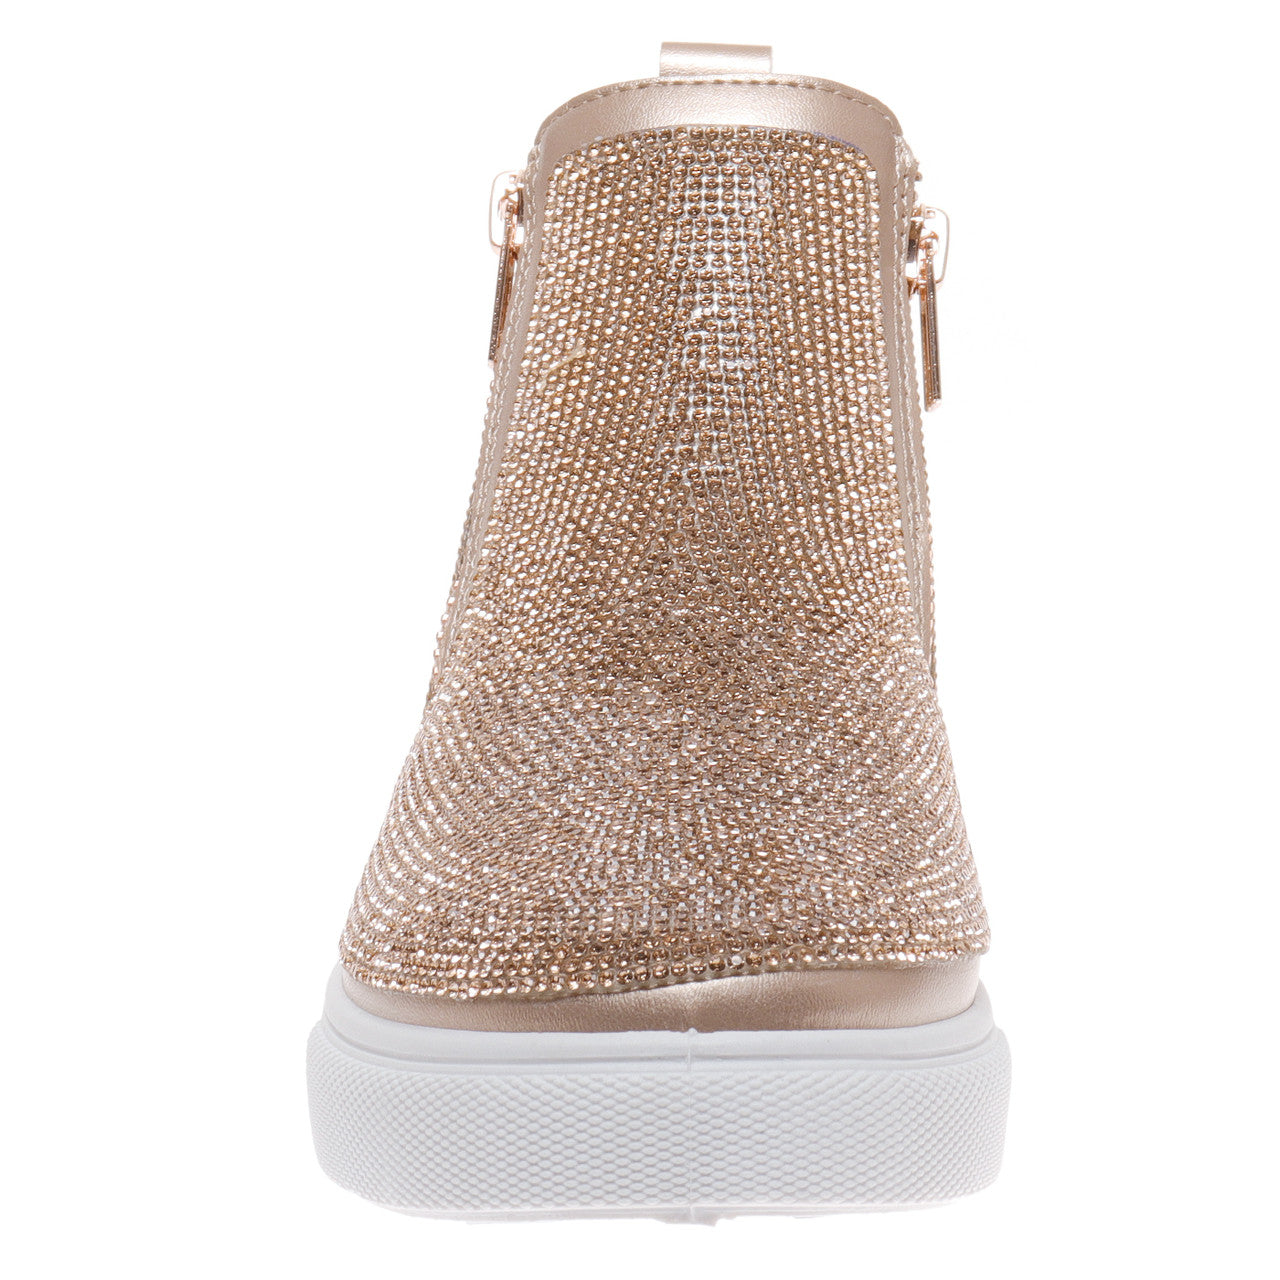 All that Glitters Rose Gold Sparkle Bootie